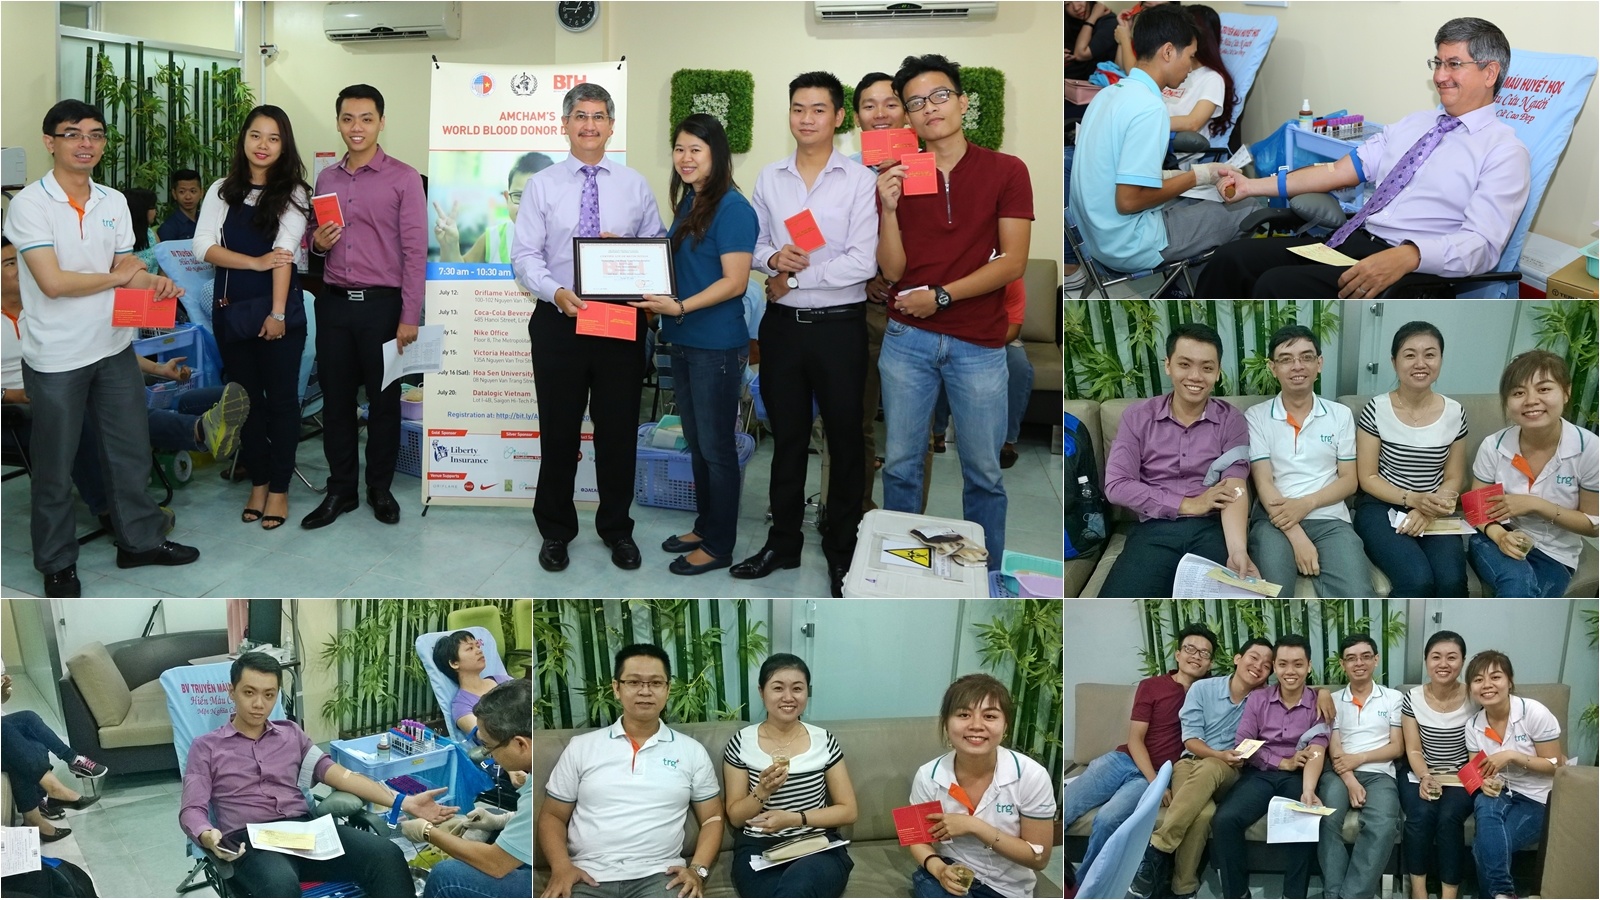 TRG joins AmCham’s World Blood Donor Days 2016